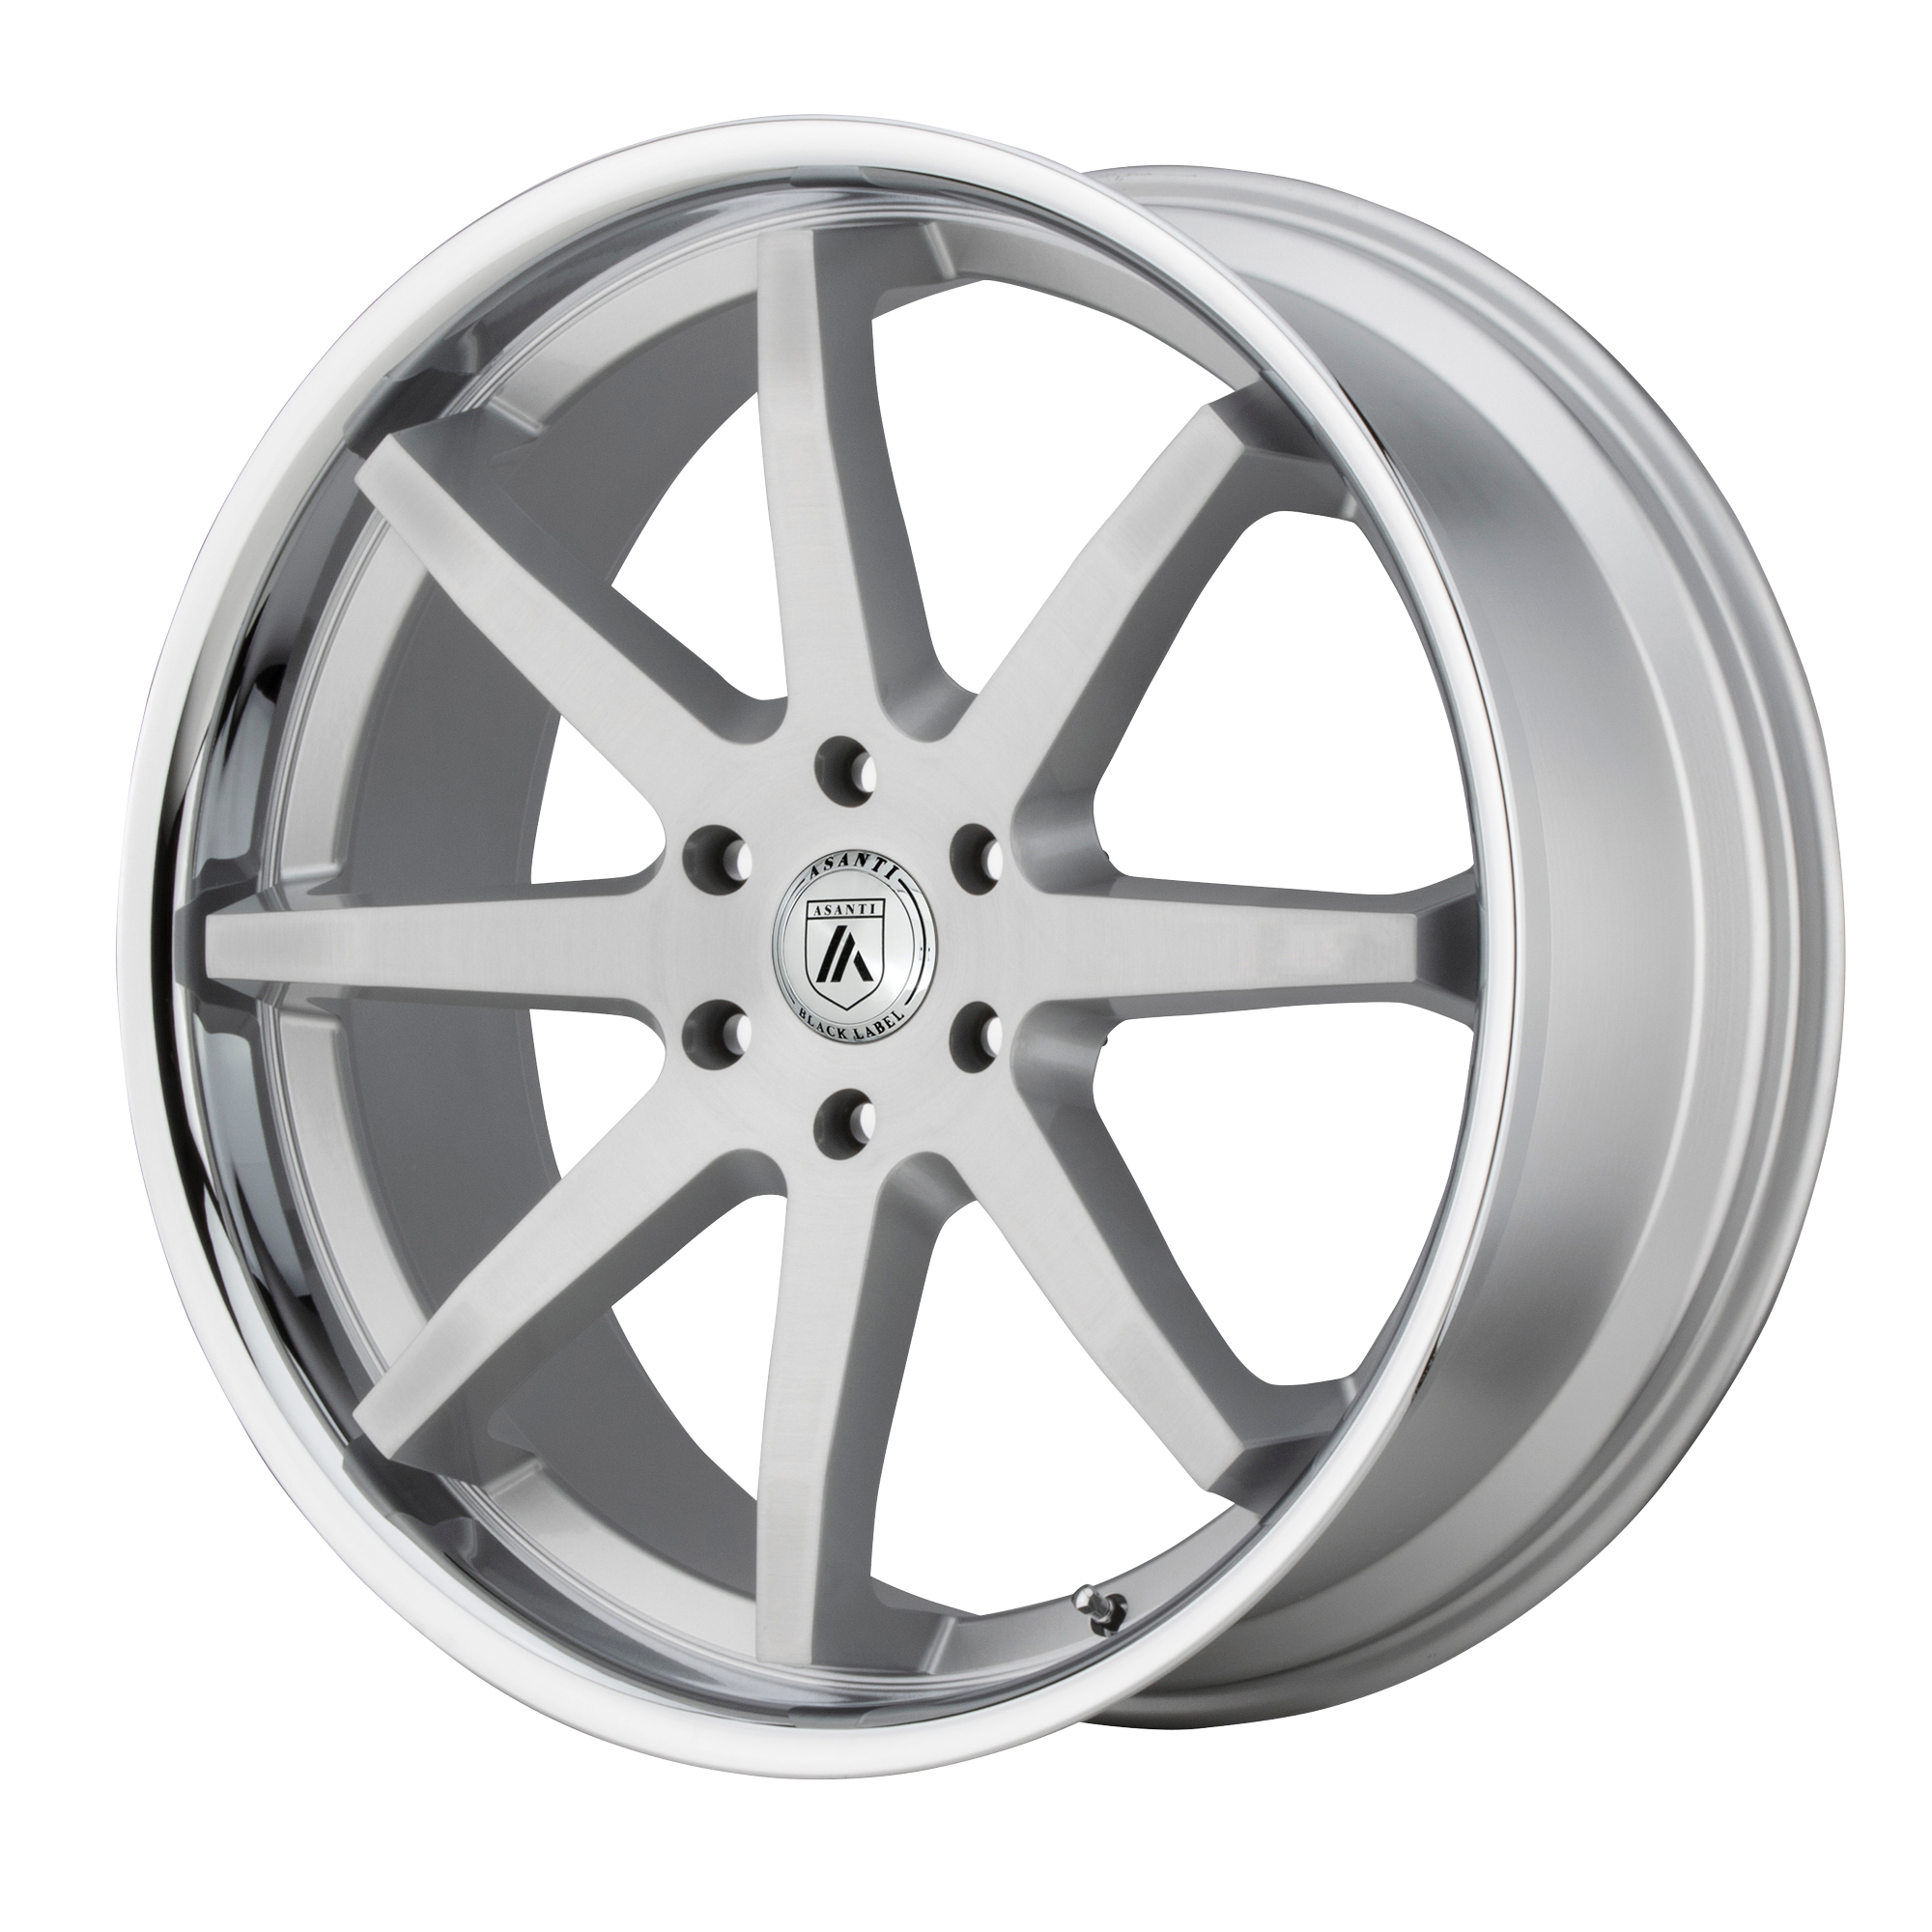 KAISER 22x9.5 6x135.00 BRUSHED SILVER W/ CHROME LIP (30 mm) - Tires and Engine Performance